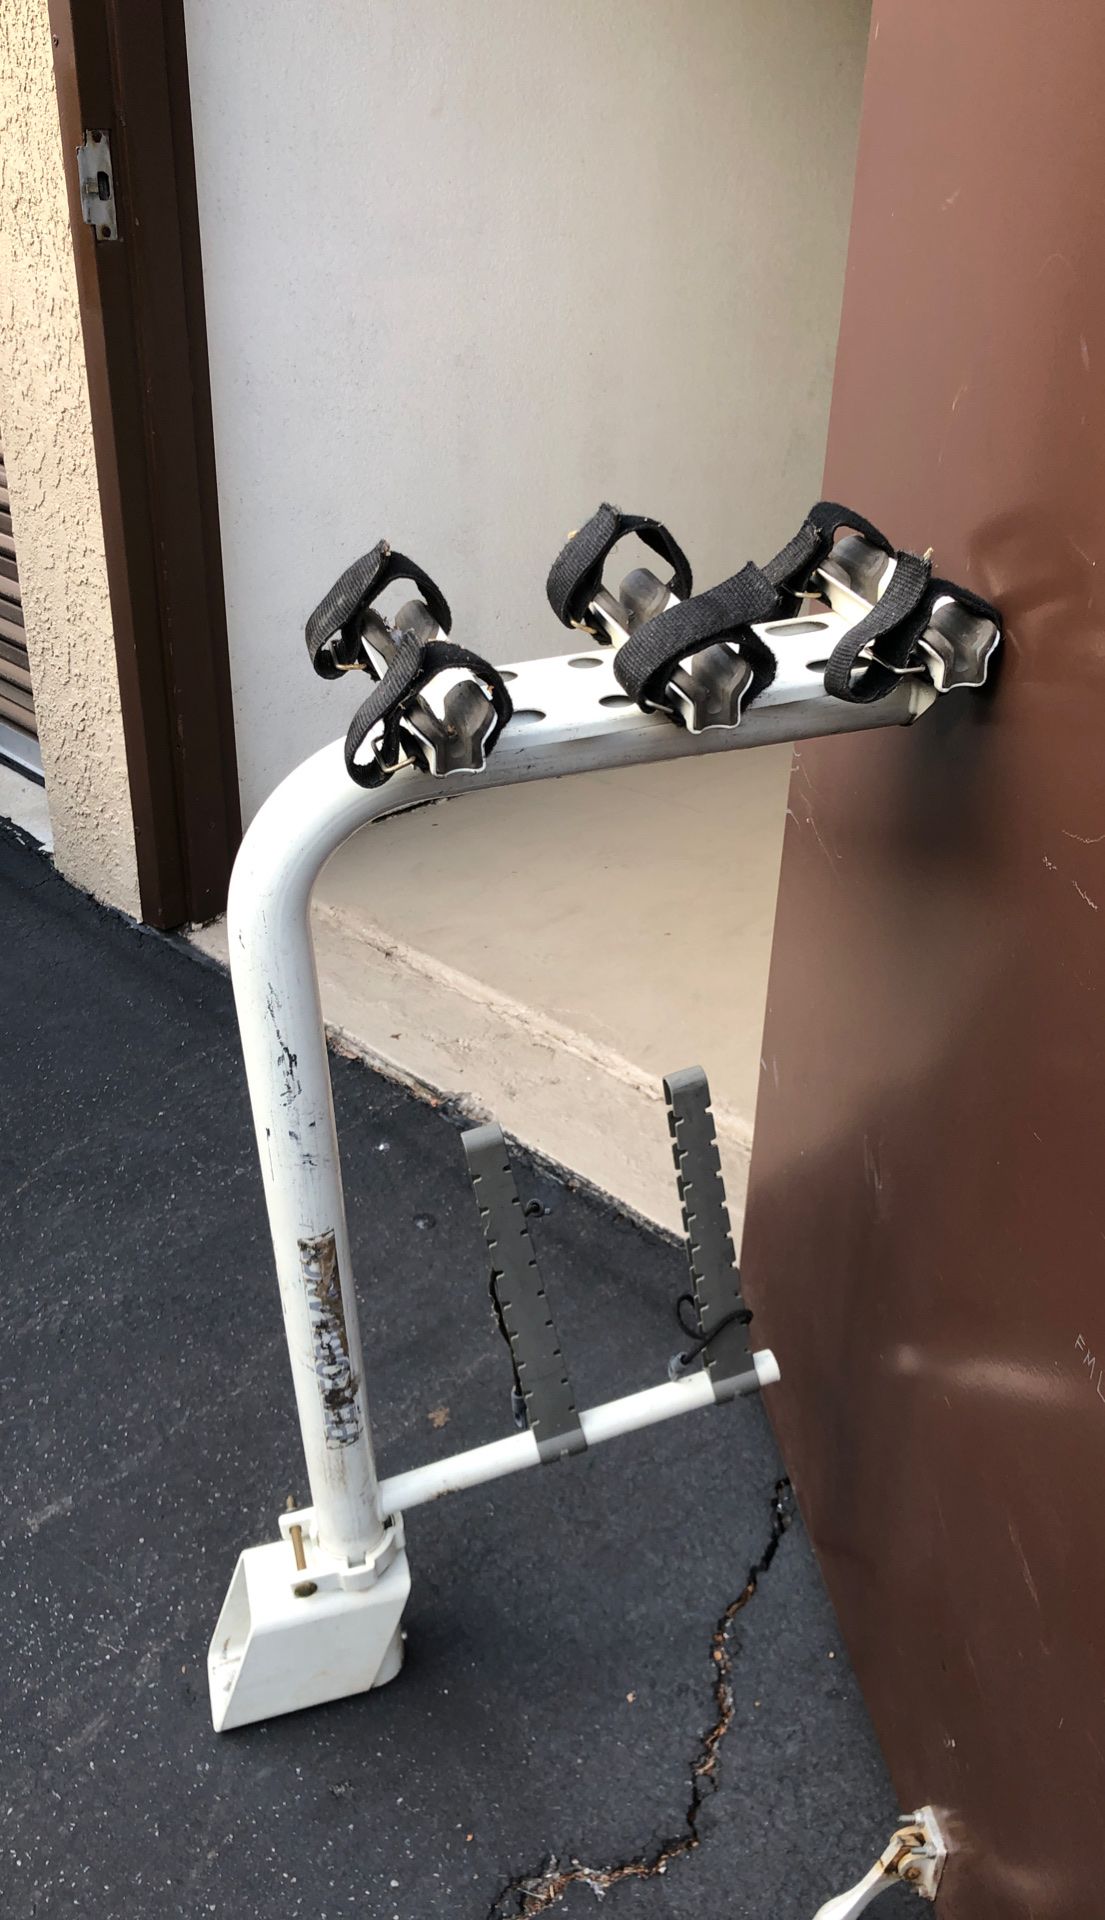 Bike Rack Performance. Designed to fit in trailer hitch